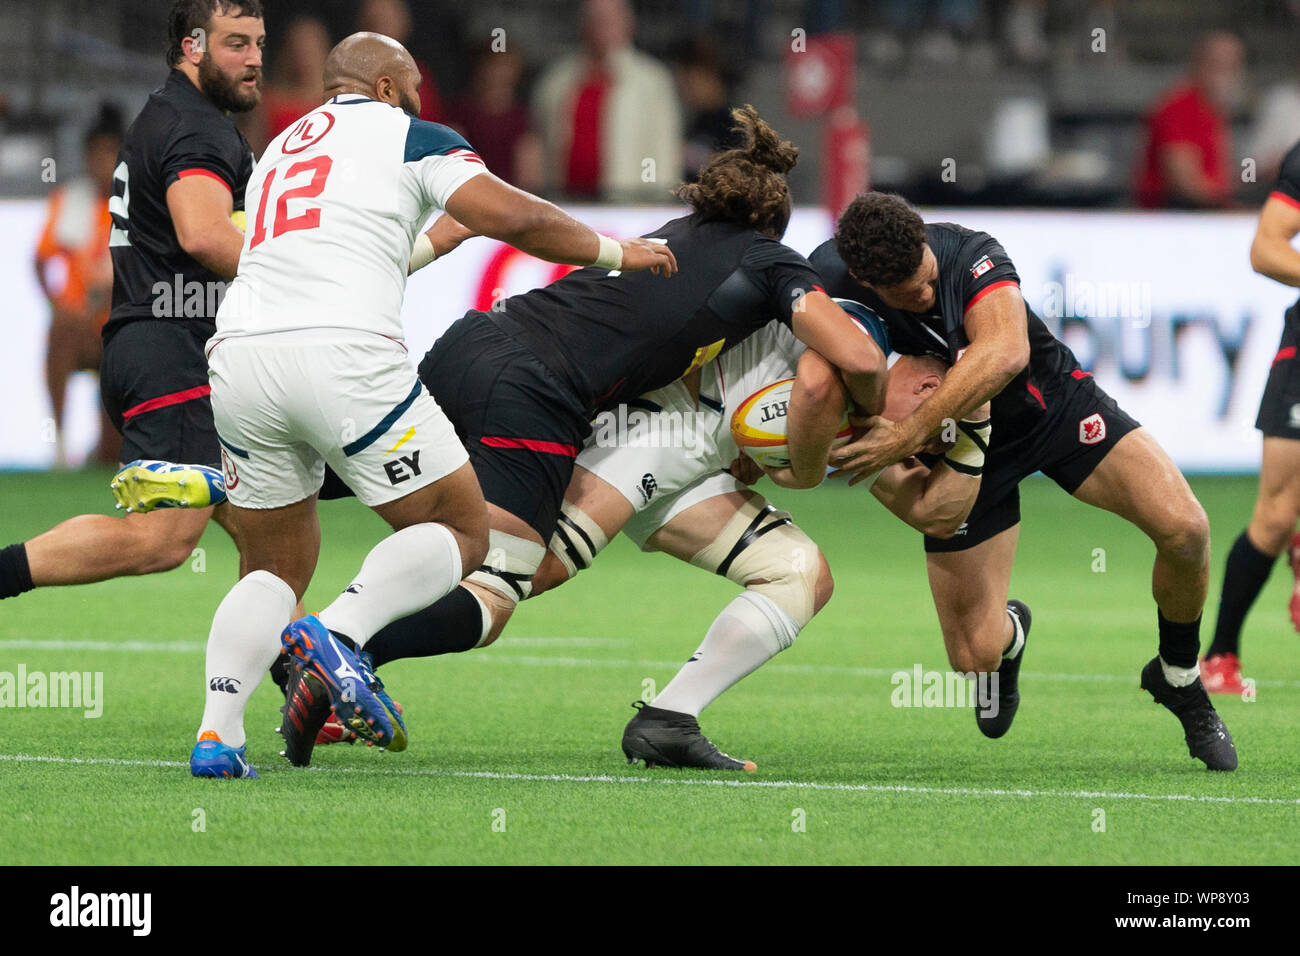 Vancouver, Canada. 7 September, 2019.  U.S.A. Hanco Germishuys (7)(white), being tackled by Canada Lucas Rumball (7)(left) and Canada Ciaran Hearn (12)(right). USA wins 25-15. World Cup Rugby pre-game - Canada vs USA, at BC Place Stadium, Vancouver, Canada. Gerry Rousseau/Alamy Live News Stock Photo